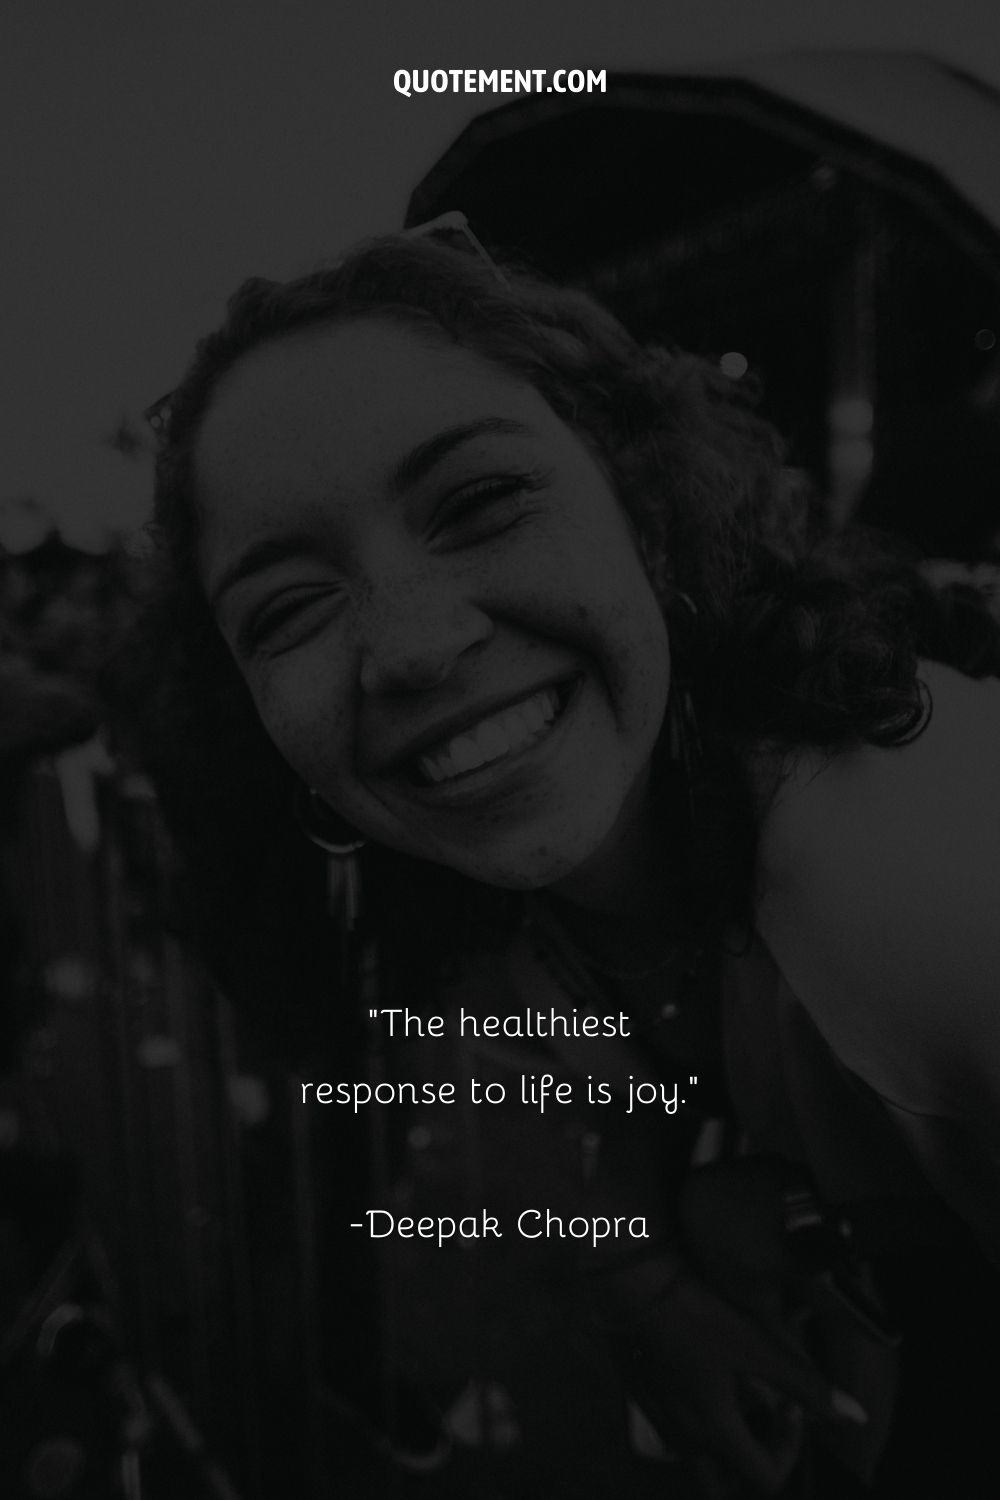 monochrome portrayal of a woman laughing representing a simple cute quote
